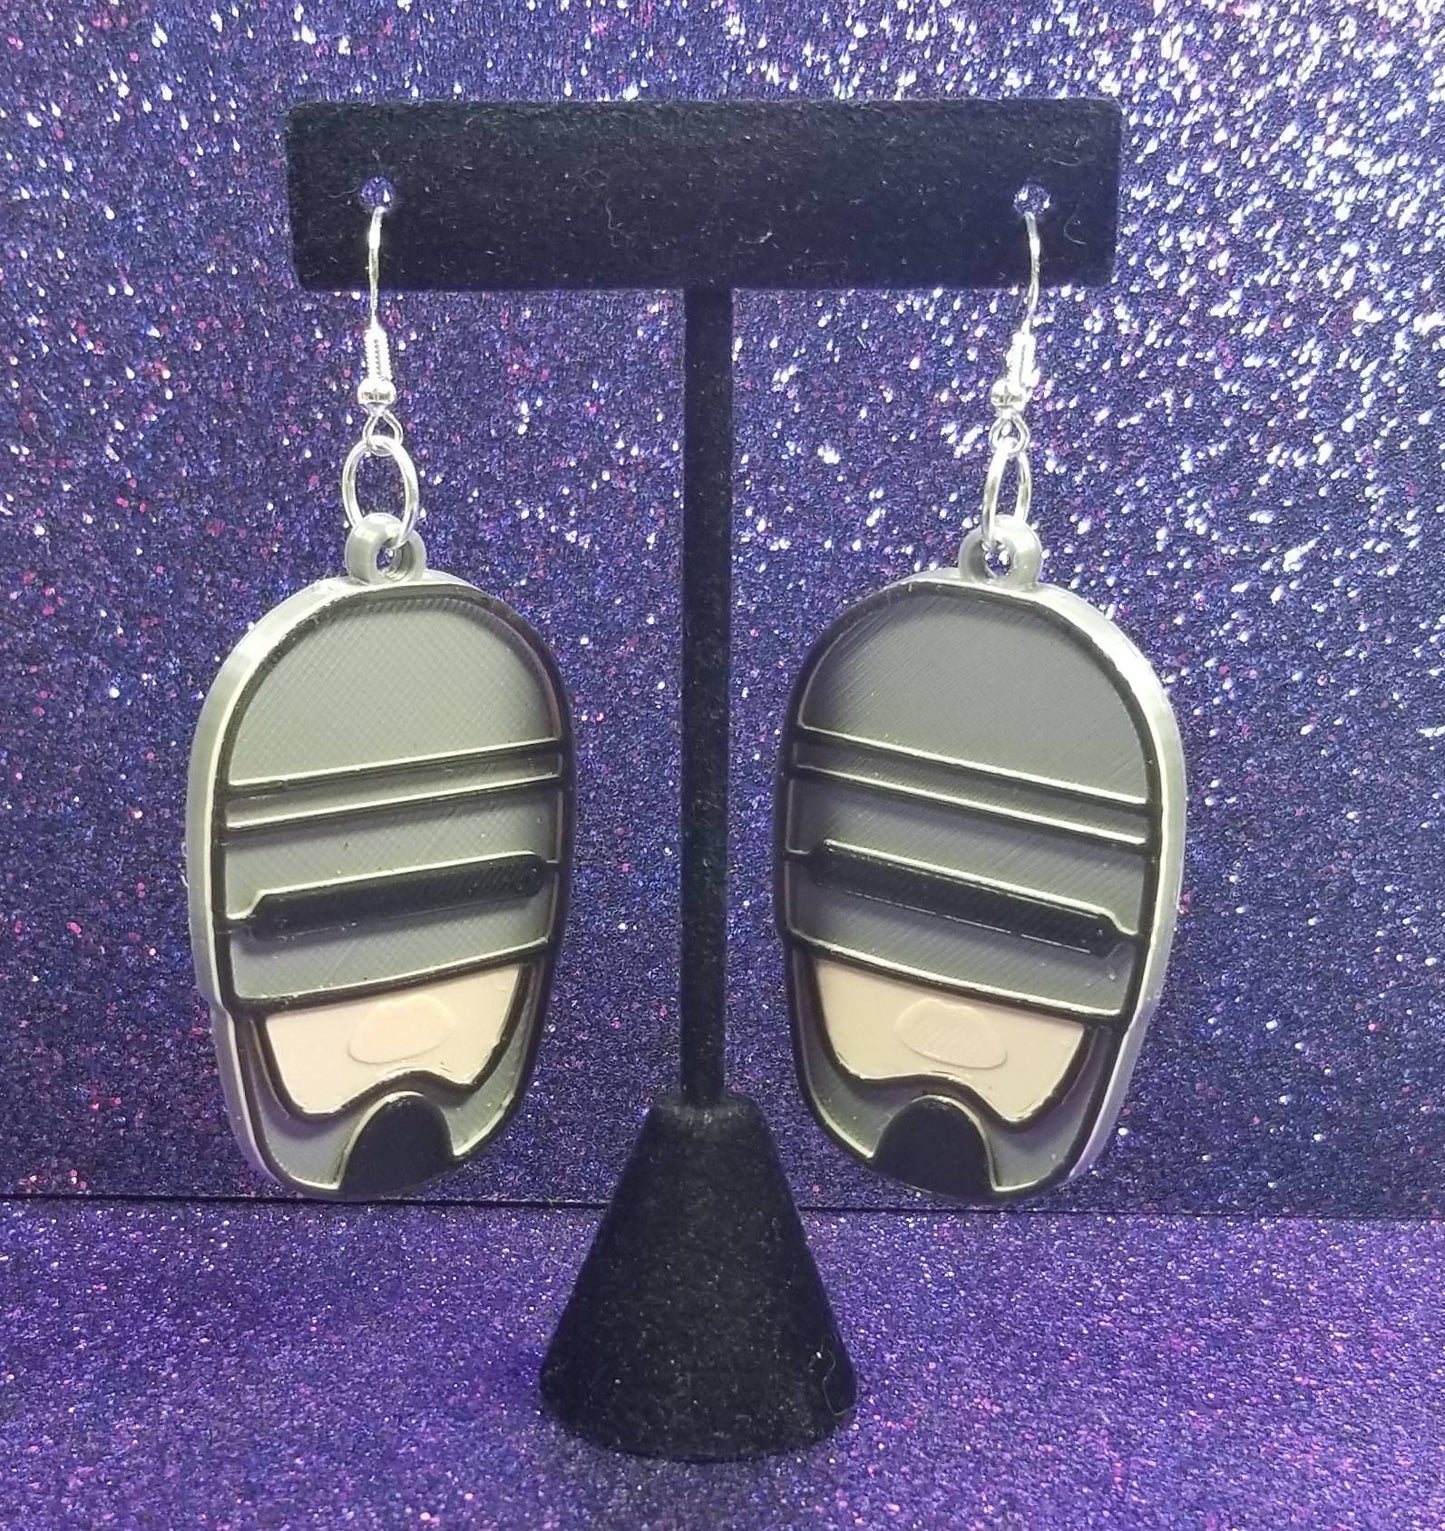 Half Breed Sellout Statement Earrings 3D Printed